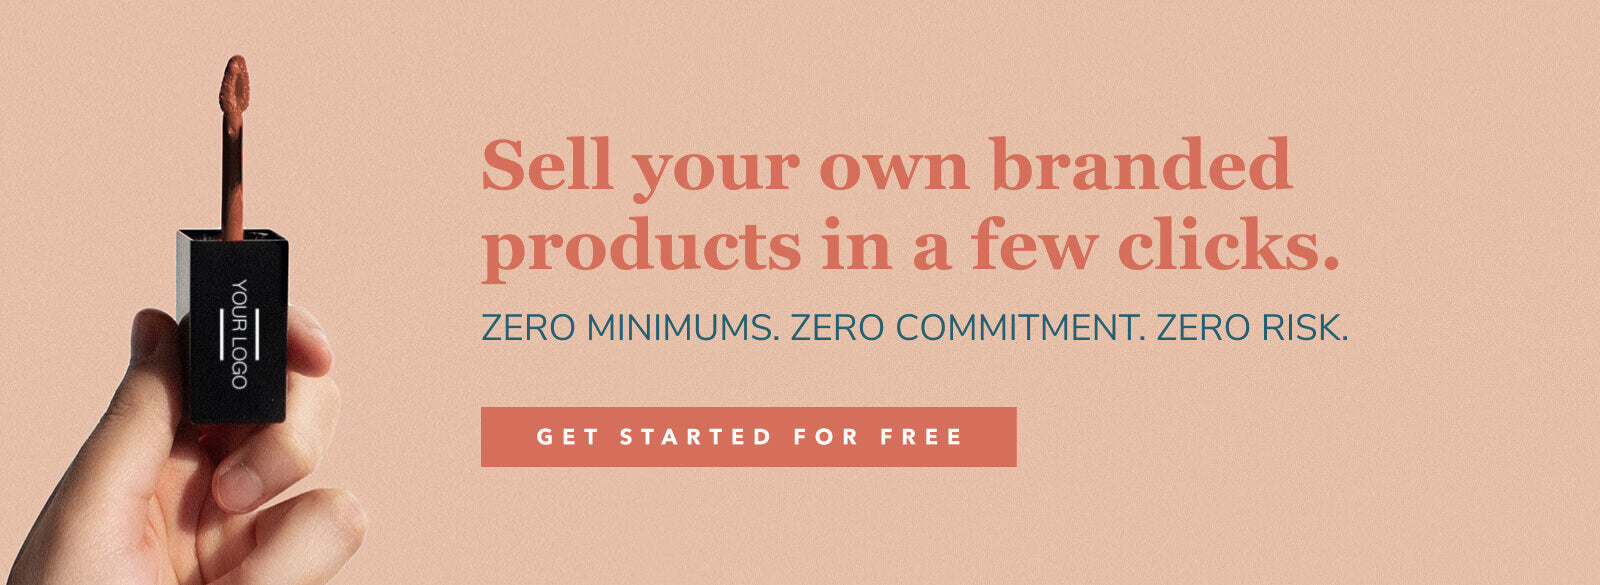 Build your side hustle today and create a branded product line in under 5 minutes. Try free for 14 days. 